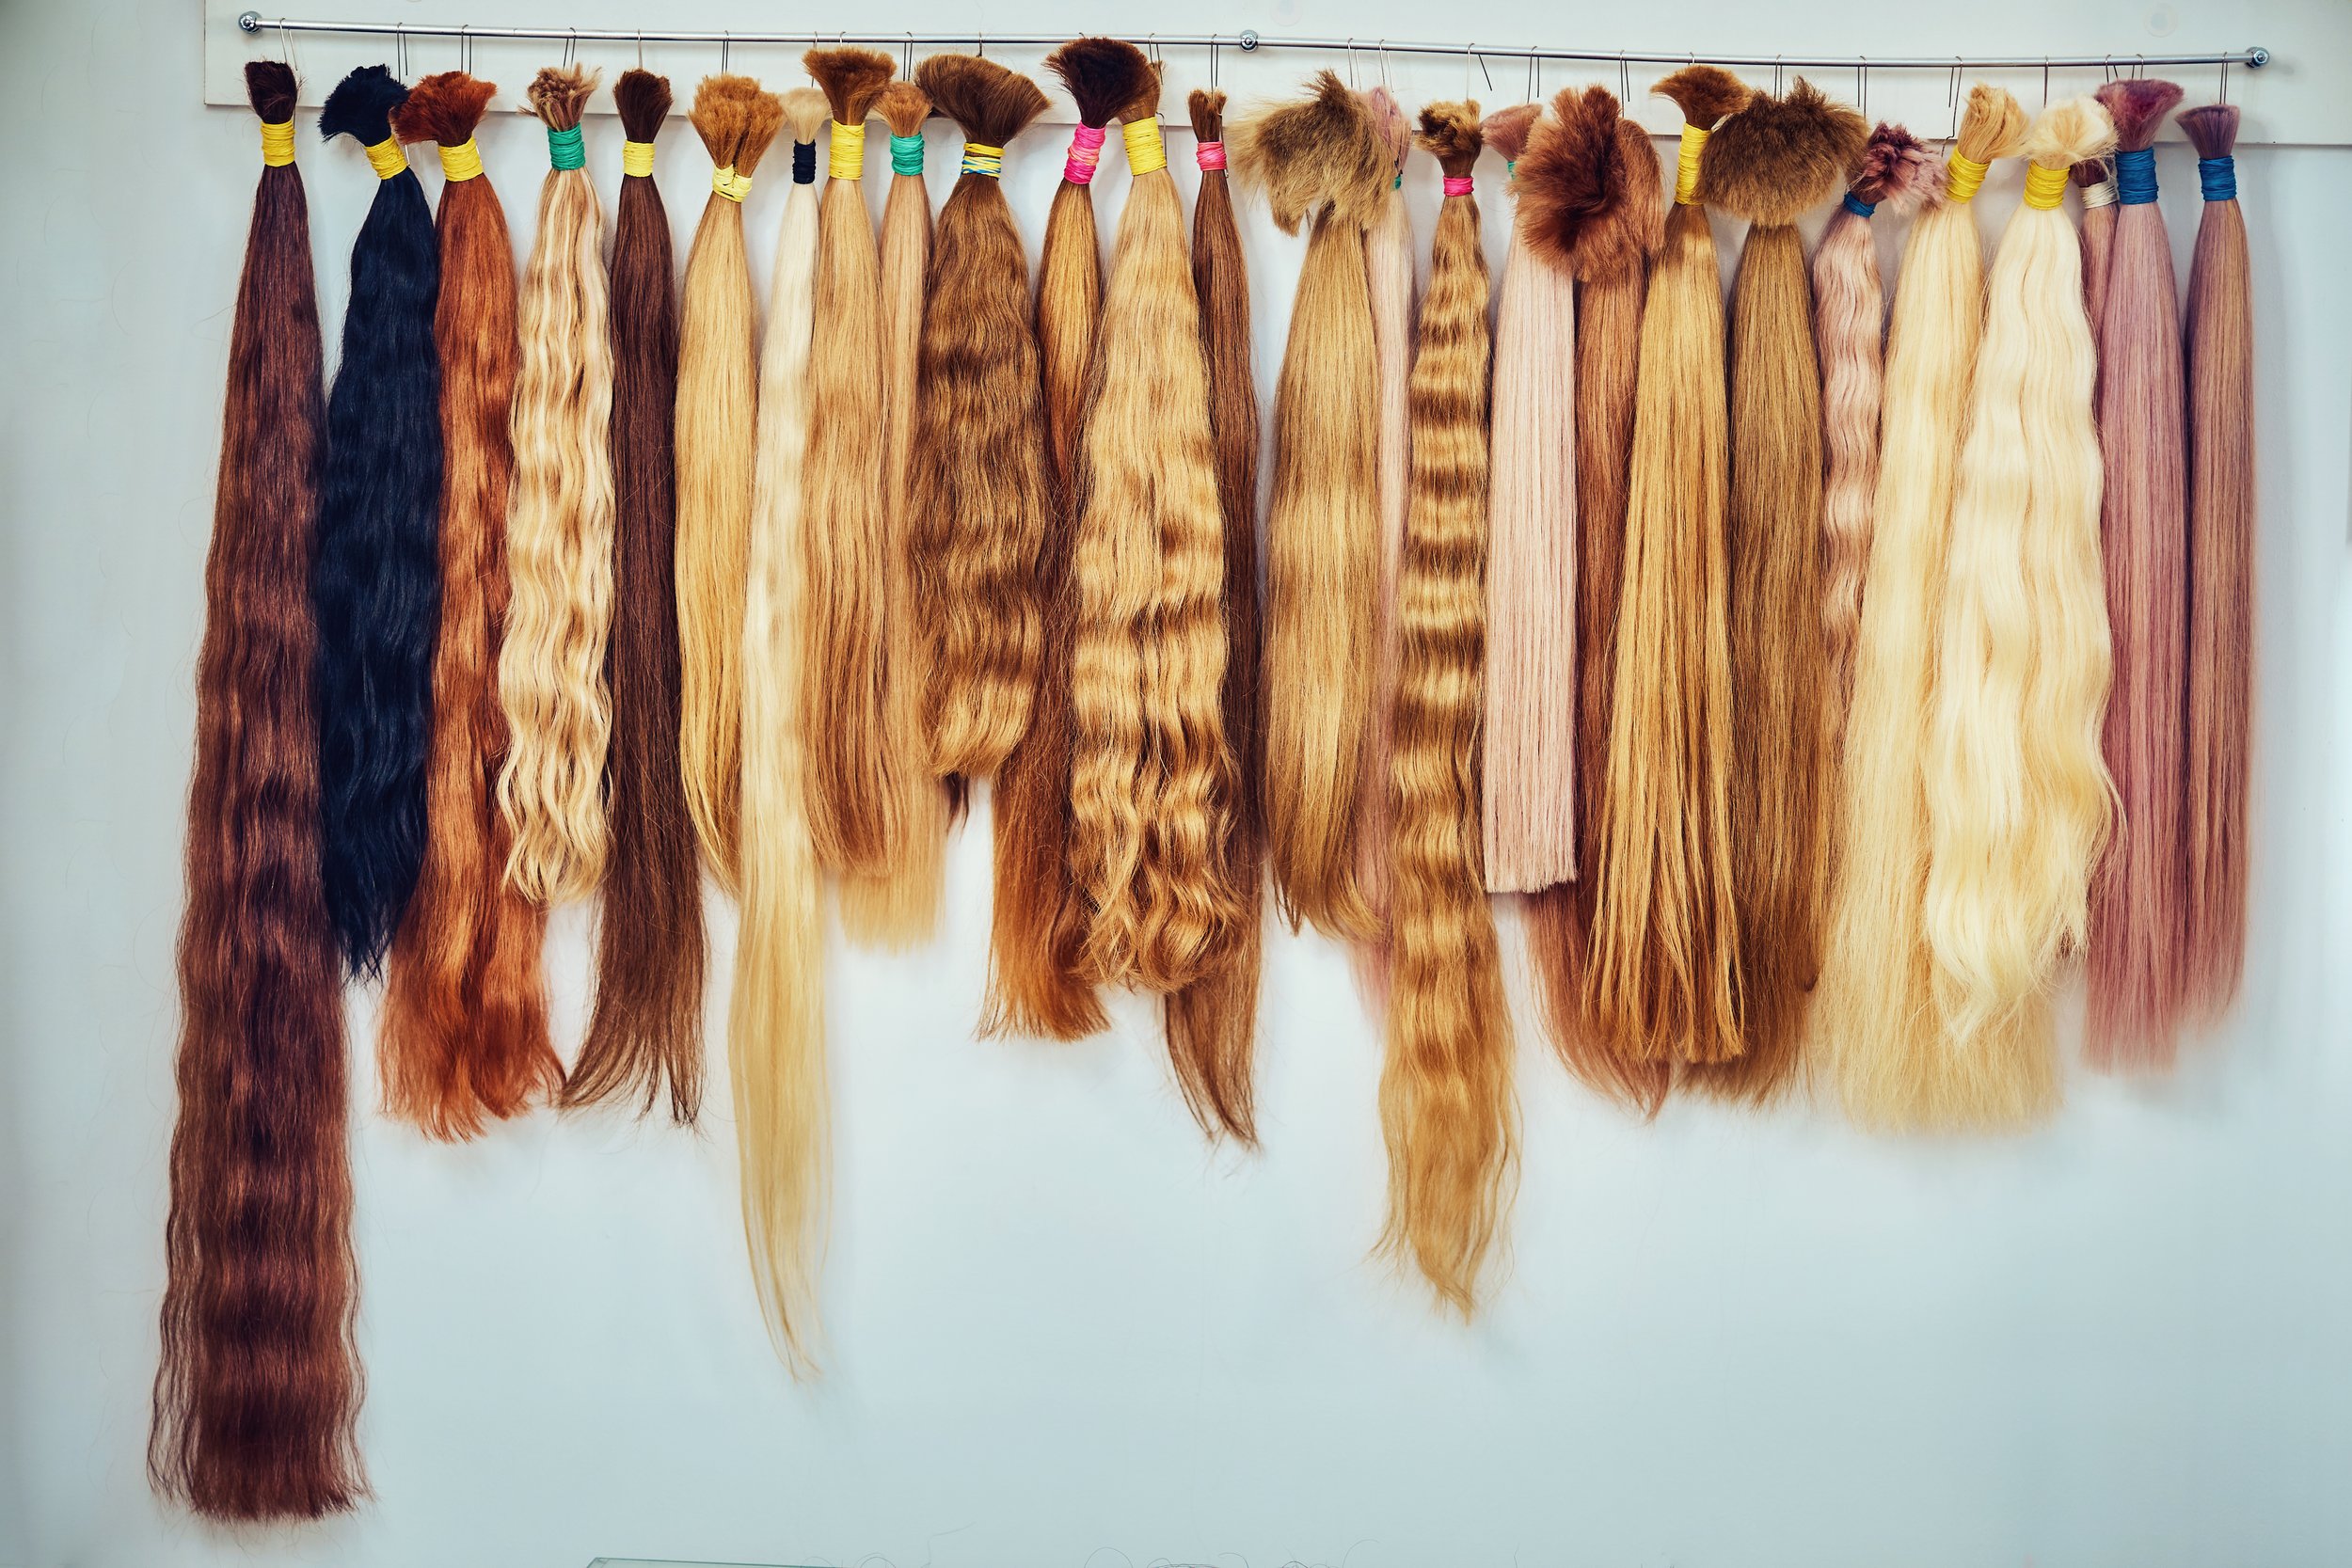 Premium-hair-extension-palette-with-color-samples-from-blonde-to-1098208008_6000x4000.jpeg